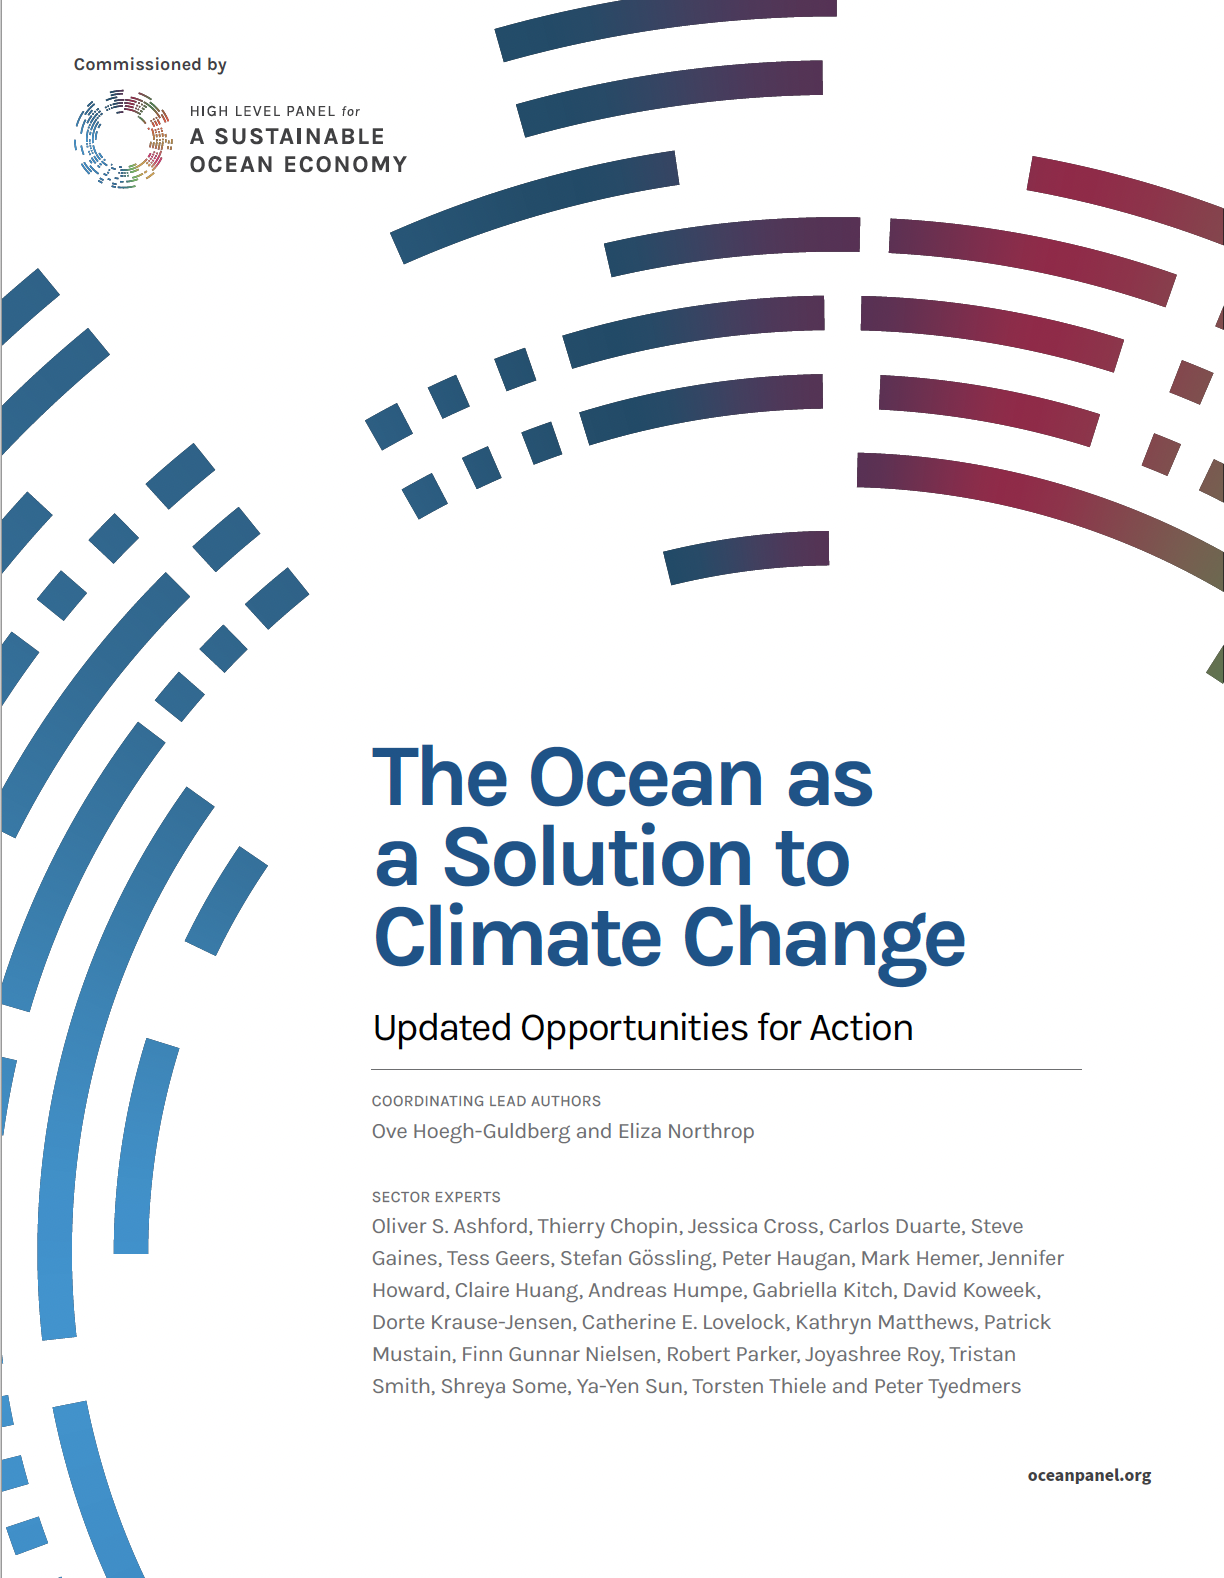 The Ocean as a Solution to Climate Change: Updated Opportunities for Action